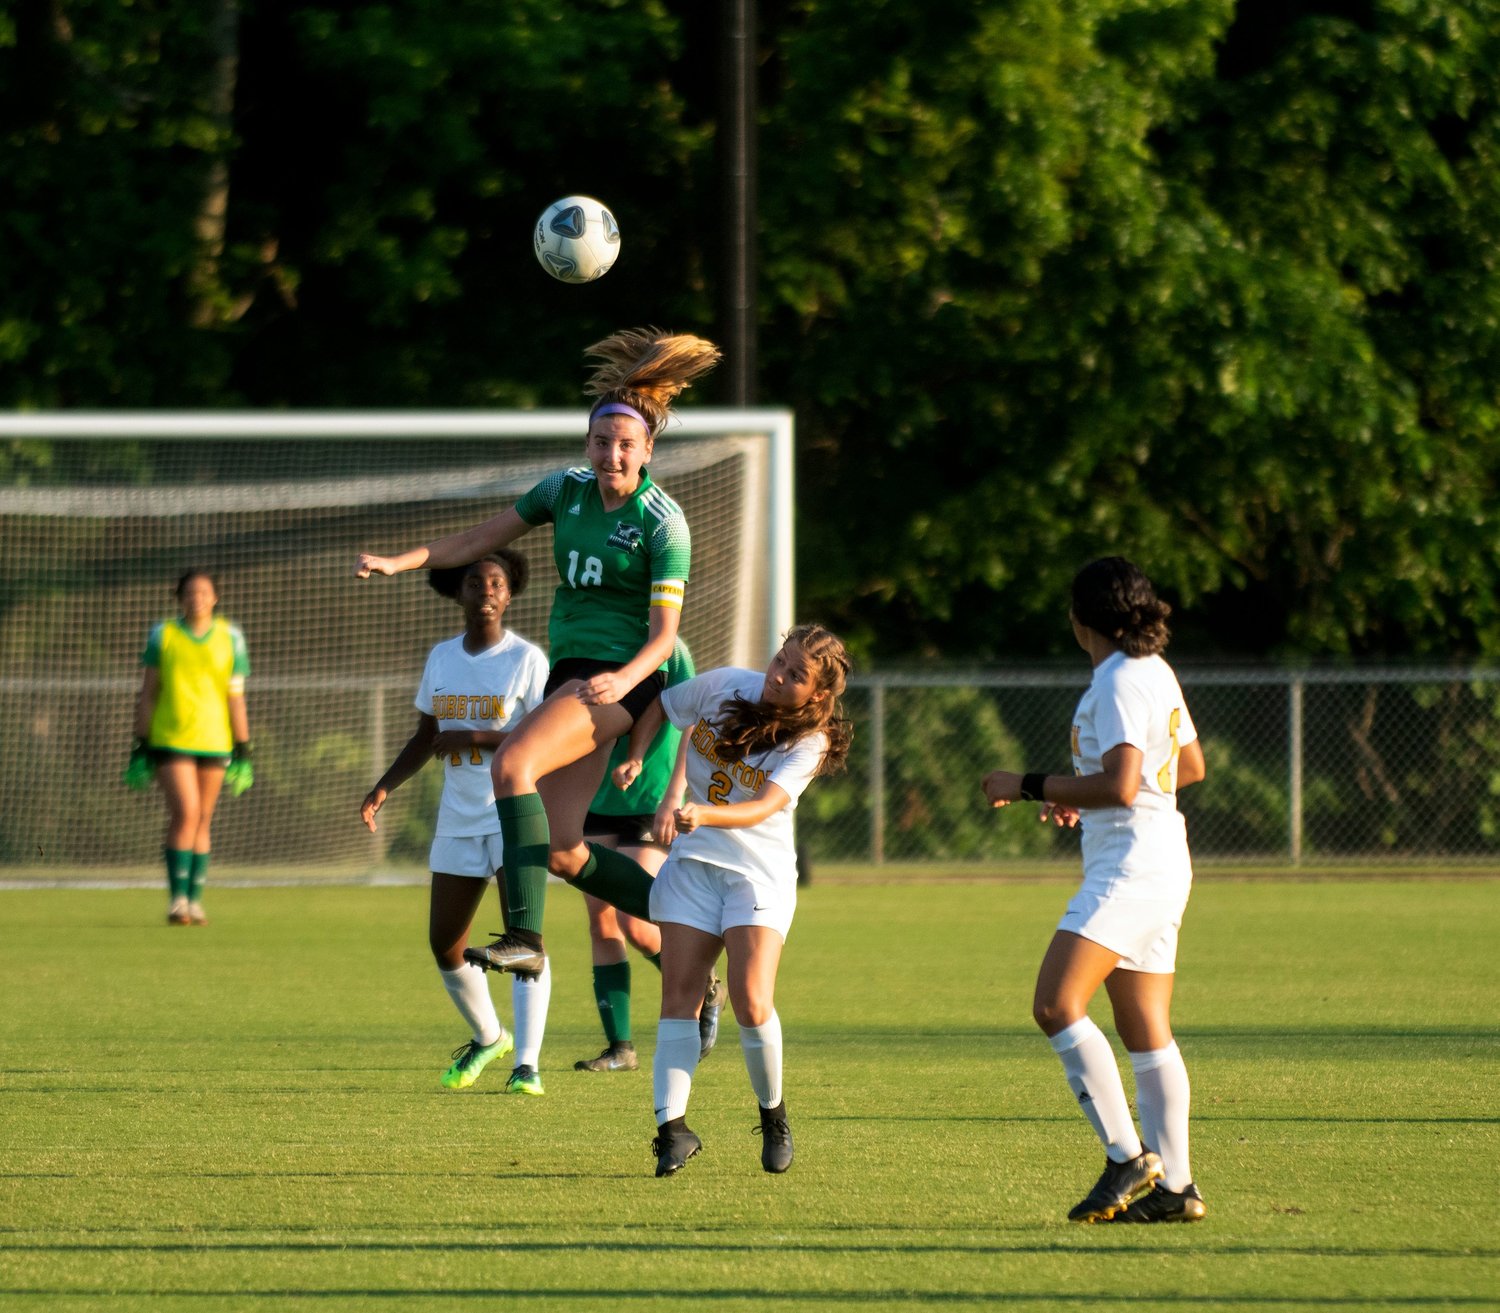 Woods Charter junior Lucy Miller (18) heads the ball during the Wolves' 5-0 win over the Hobbton Wildcats last Tuesday in Cary. Miller scored her lone goal in the win on a header off of a corner kick in the first half.